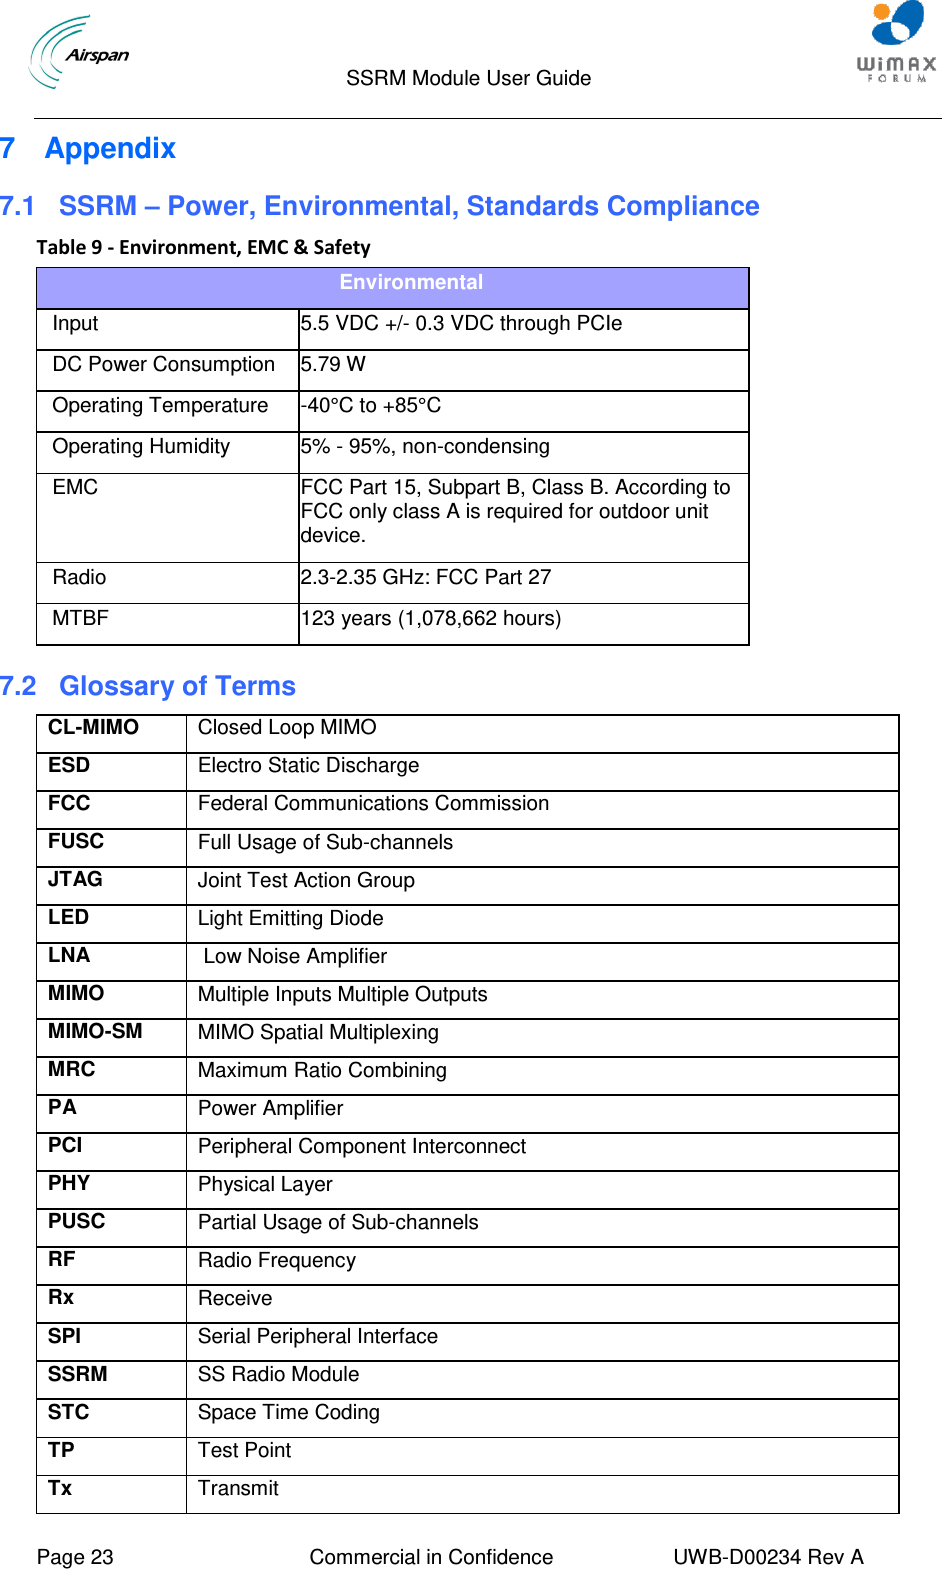                                  SSRM Module User Guide     Page 23  Commercial in Confidence  UWB-D00234 Rev A    7  Appendix 7.1 SSRM – Power, Environmental, Standards Compliance Table 9 - Environment, EMC &amp; Safety Environmental Input  5.5 VDC +/- 0.3 VDC through PCIe  DC Power Consumption 5.79 W Operating Temperature -40°C to +85°C Operating Humidity 5% - 95%, non-condensing EMC FCC Part 15, Subpart B, Class B. According to FCC only class A is required for outdoor unit device. Radio 2.3-2.35 GHz: FCC Part 27   MTBF 123 years (1,078,662 hours) 7.2  Glossary of Terms CL-MIMO    Closed Loop MIMO ESD Electro Static Discharge FCC               Federal Communications Commission FUSC Full Usage of Sub-channels JTAG Joint Test Action Group LED Light Emitting Diode LNA  Low Noise Amplifier MIMO Multiple Inputs Multiple Outputs MIMO-SM    MIMO Spatial Multiplexing MRC Maximum Ratio Combining PA Power Amplifier PCI Peripheral Component Interconnect PHY Physical Layer PUSC Partial Usage of Sub-channels RF Radio Frequency Rx Receive SPI Serial Peripheral Interface SSRM SS Radio Module STC Space Time Coding TP Test Point Tx Transmit 